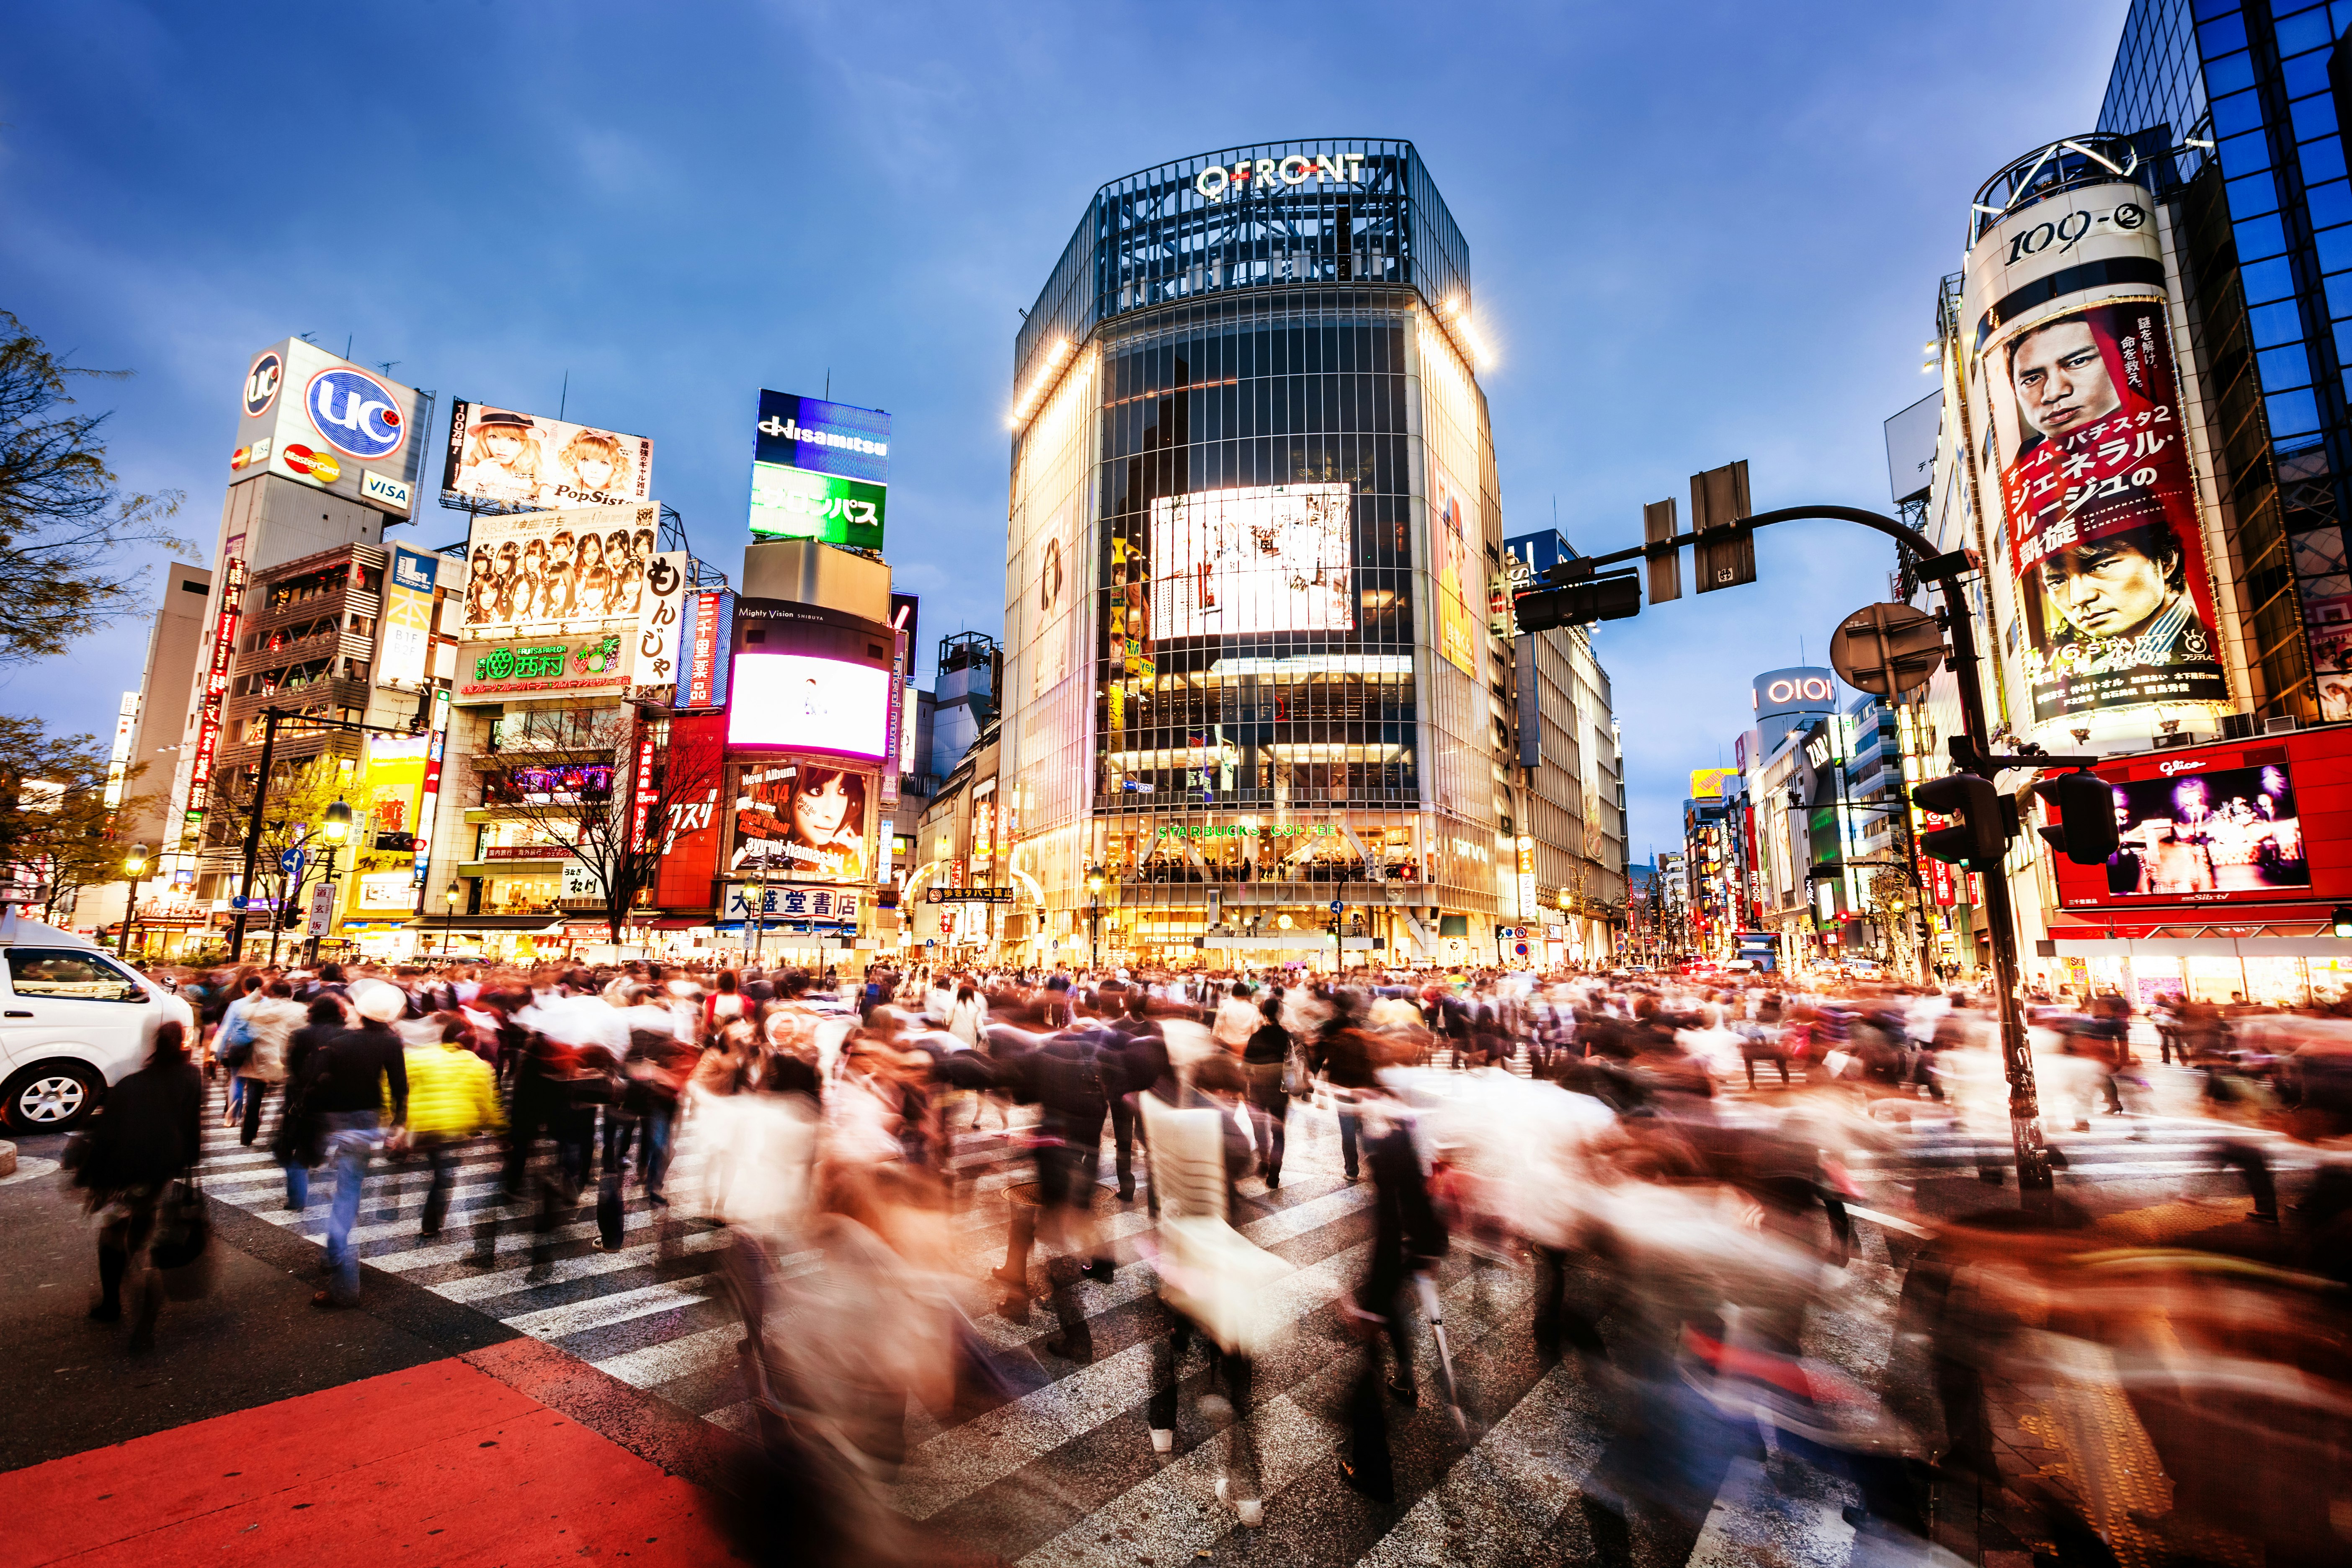 Long exposure of pedestrians crossing the famous Shibuya Crossing in Tokyo at dusk.